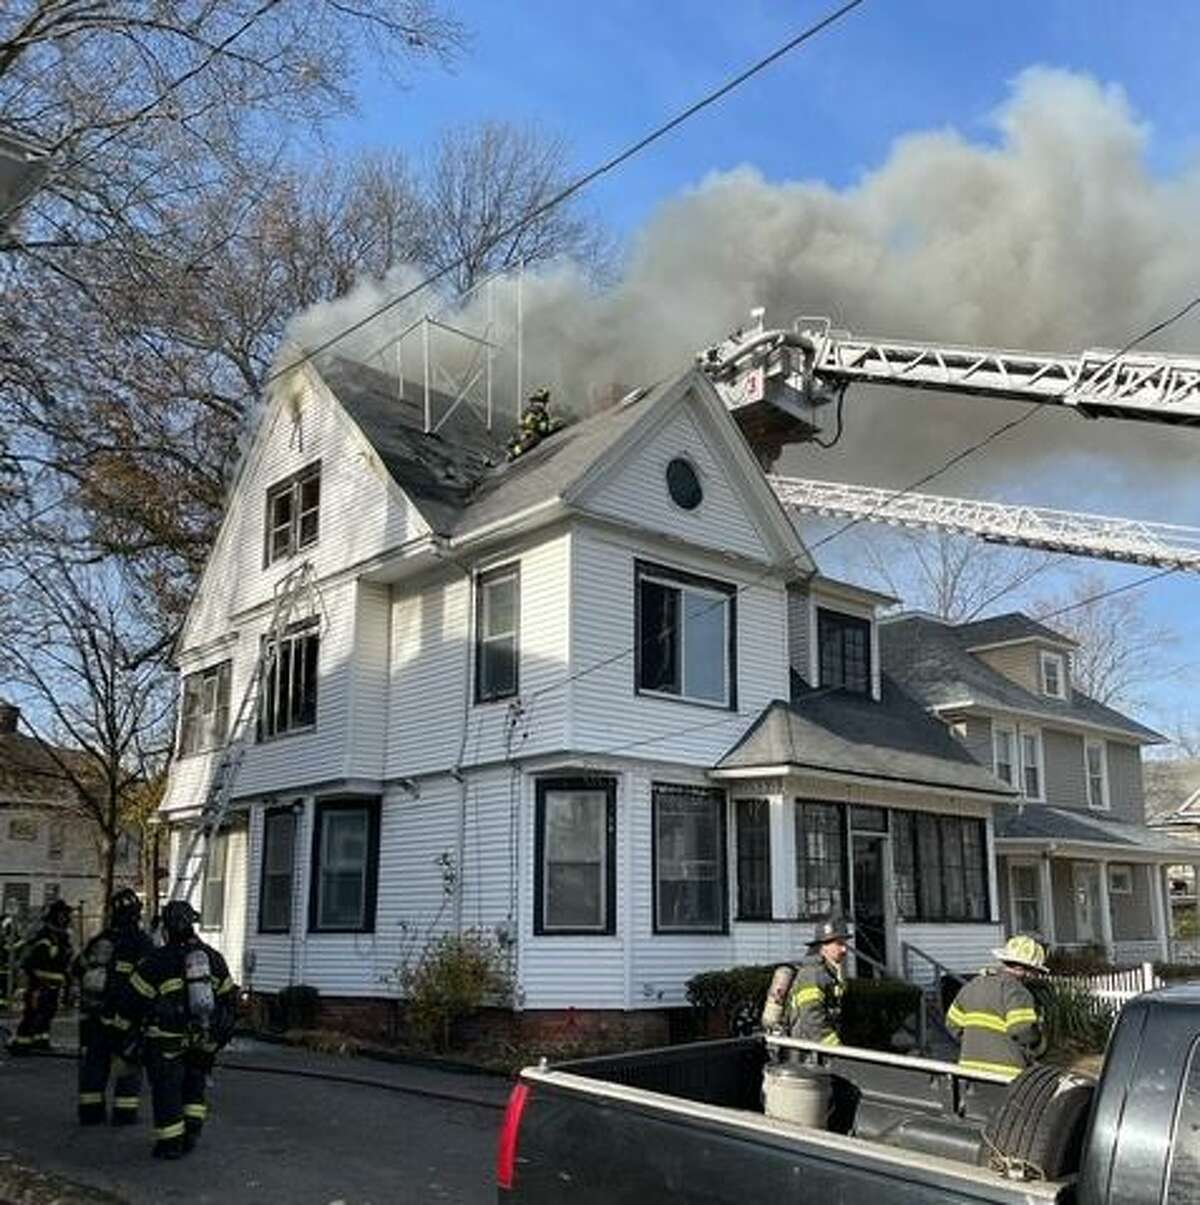 Firefighters battled a two-alarm house fire on Vine Street in Hartford Monday afternoon, rescuing two occupants trapped on the third floor, according to fire officials.